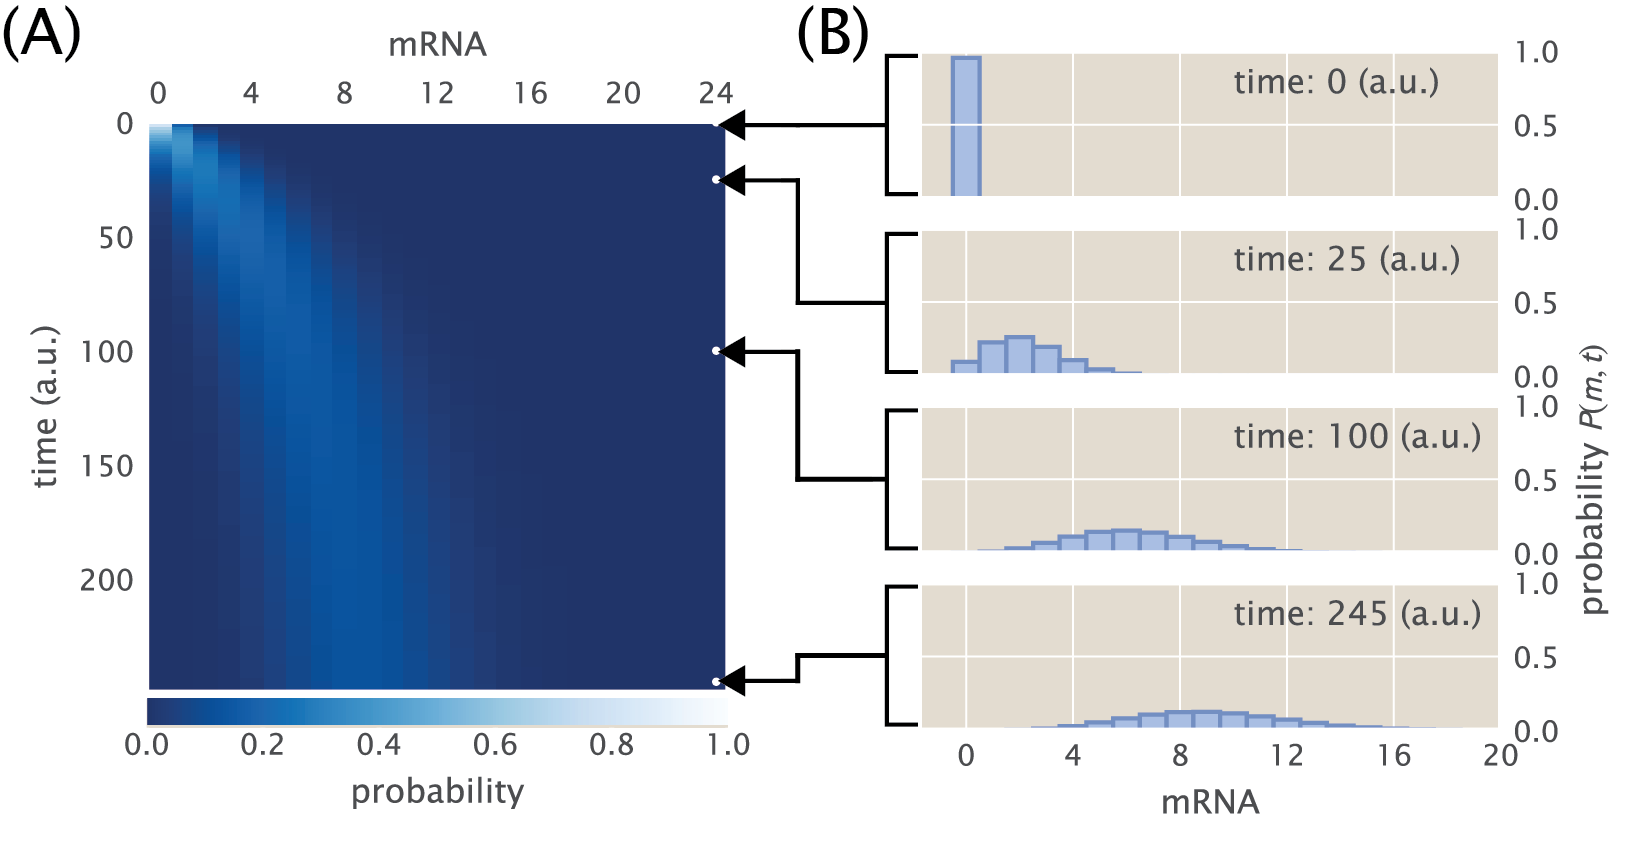 Figure 6: Time evolution of mRNA distribution. (A) Heat map of the time evolution of the mRNA distribution (Eq. \ref{eq:master_simple}) with P(m=0, t=0) = 1, i.e., a delta function at zero mRNAs at time zero. (B) Snapshots of the same time-evolving distribution at different time points. The Python code (ch1_fig06.py) used to generate the plot in part (A) of this figure can be found on the thesis GitHub repository.